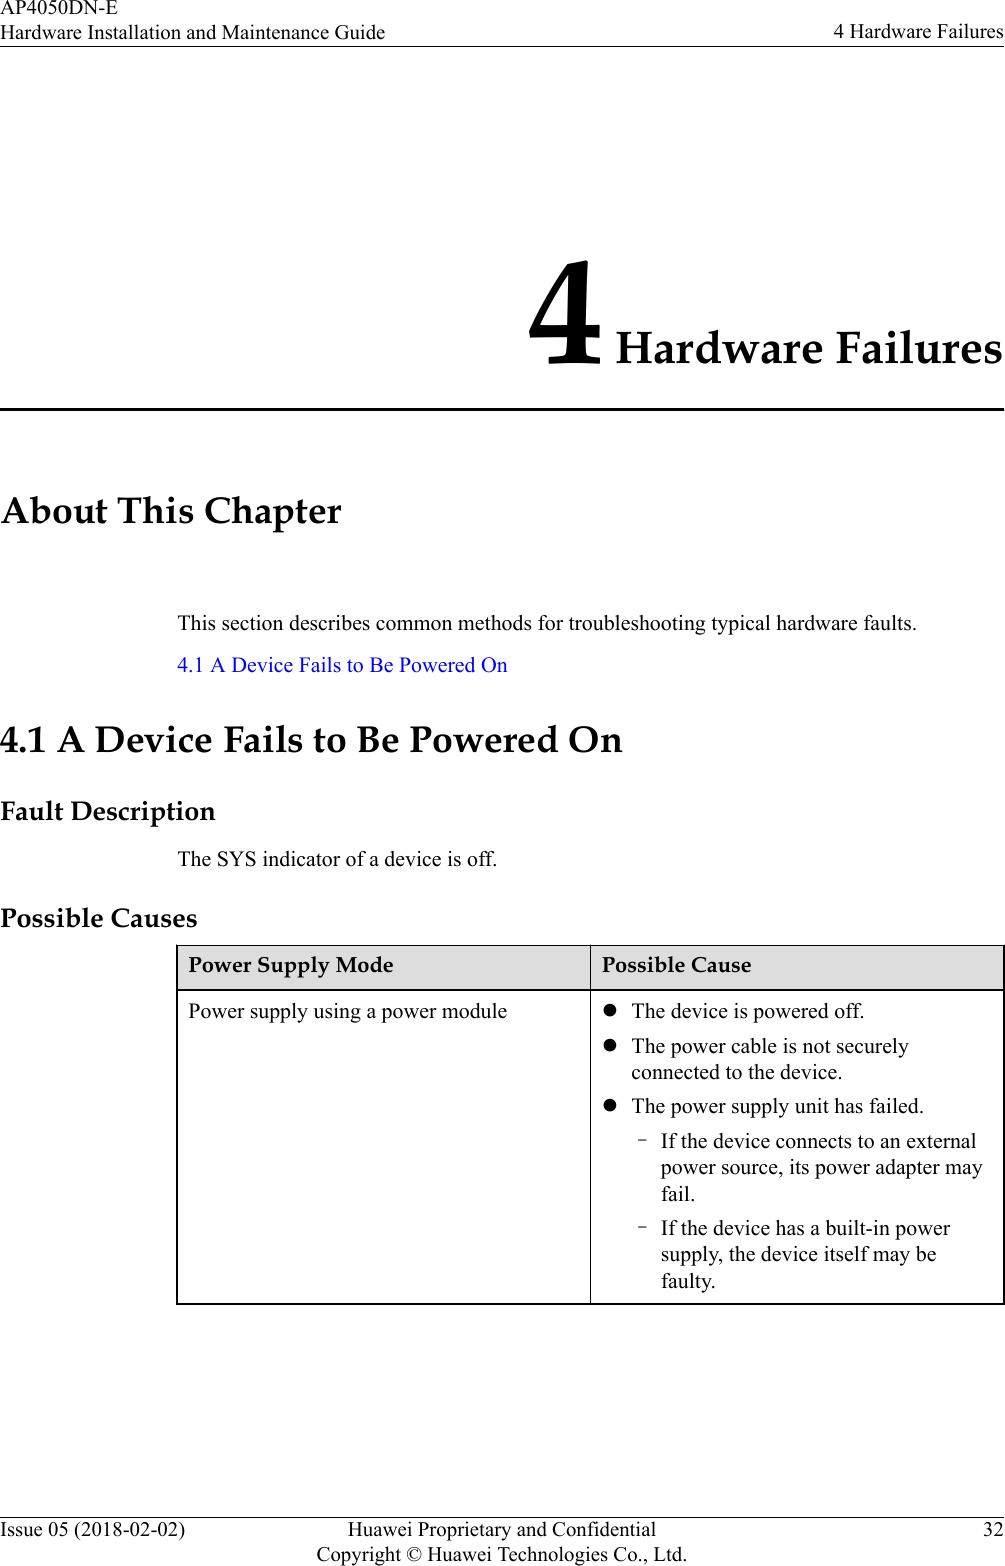 4 Hardware FailuresAbout This ChapterThis section describes common methods for troubleshooting typical hardware faults.4.1 A Device Fails to Be Powered On4.1 A Device Fails to Be Powered OnFault DescriptionThe SYS indicator of a device is off.Possible CausesPower Supply Mode Possible CausePower supply using a power module lThe device is powered off.lThe power cable is not securelyconnected to the device.lThe power supply unit has failed.–If the device connects to an externalpower source, its power adapter mayfail.–If the device has a built-in powersupply, the device itself may befaulty.AP4050DN-EHardware Installation and Maintenance Guide 4 Hardware FailuresIssue 05 (2018-02-02) Huawei Proprietary and ConfidentialCopyright © Huawei Technologies Co., Ltd.32